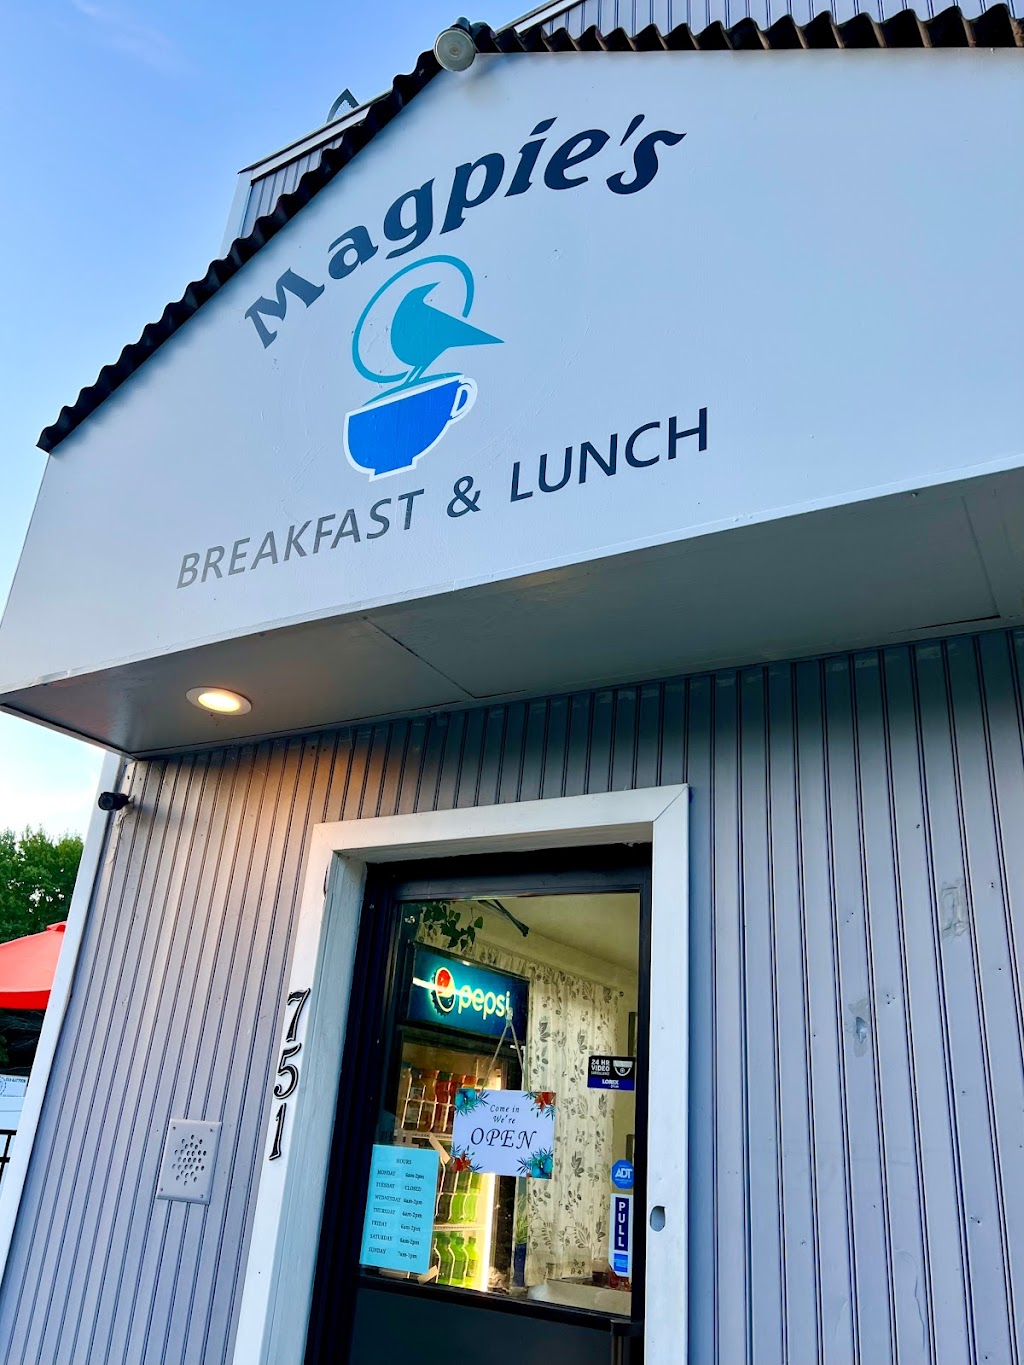 Magpies | 751 Terryville Ave, Bristol, CT 06010 | Phone: (860) 973-3320